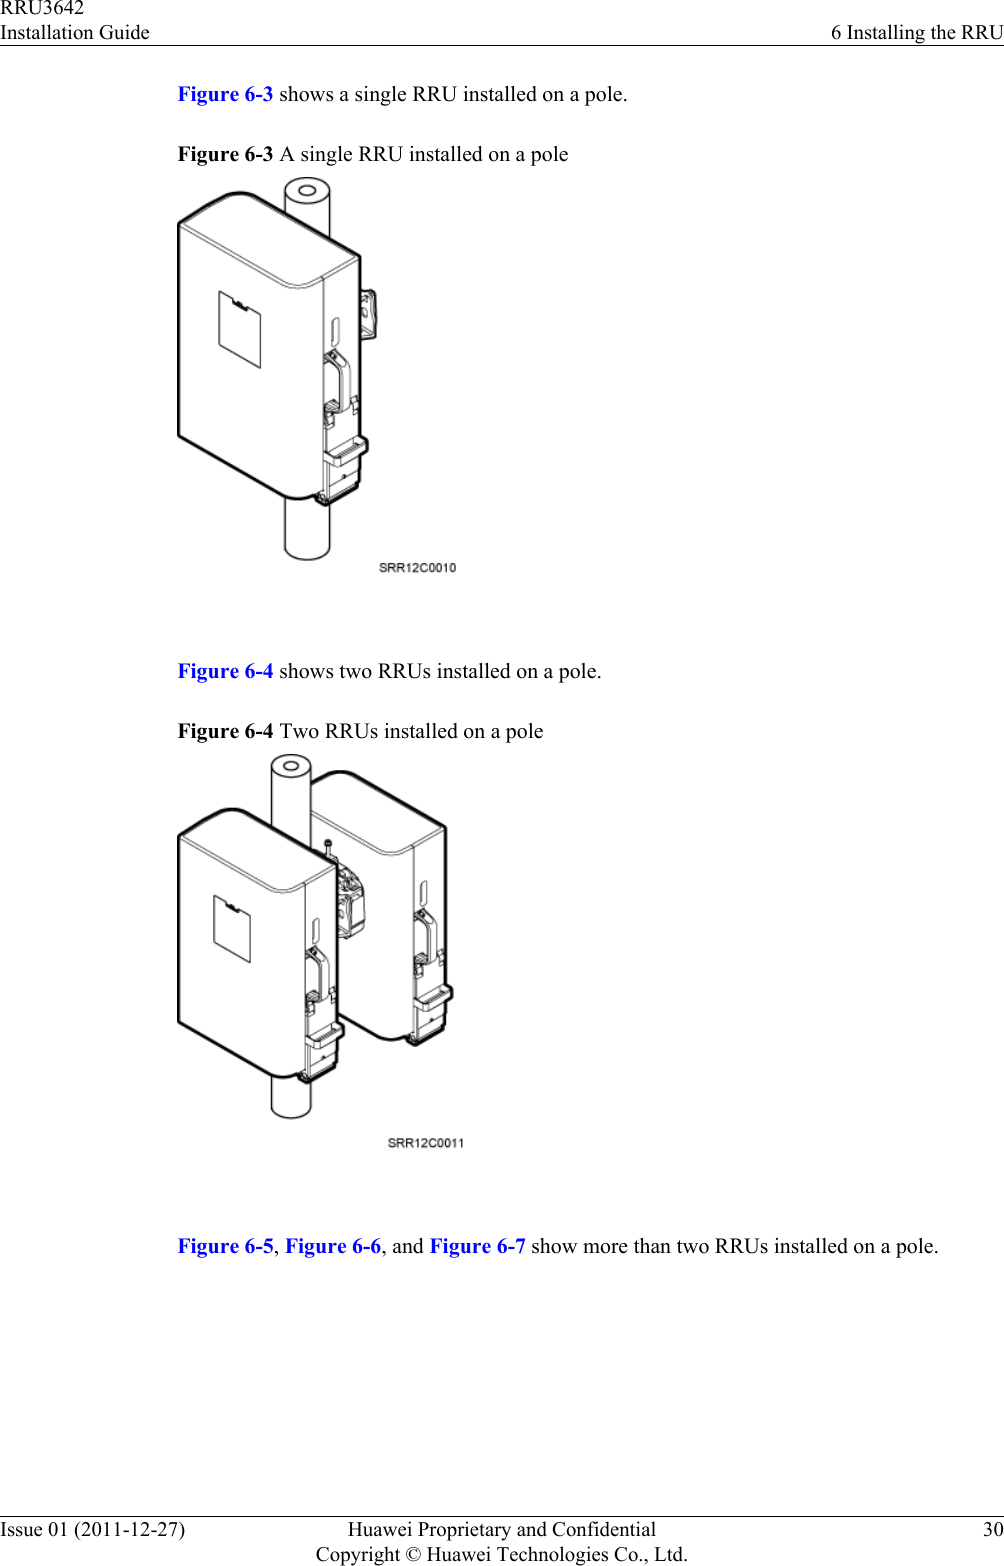 Figure 6-3 shows a single RRU installed on a pole.Figure 6-3 A single RRU installed on a pole Figure 6-4 shows two RRUs installed on a pole.Figure 6-4 Two RRUs installed on a pole Figure 6-5, Figure 6-6, and Figure 6-7 show more than two RRUs installed on a pole.RRU3642Installation Guide 6 Installing the RRUIssue 01 (2011-12-27) Huawei Proprietary and ConfidentialCopyright © Huawei Technologies Co., Ltd.30